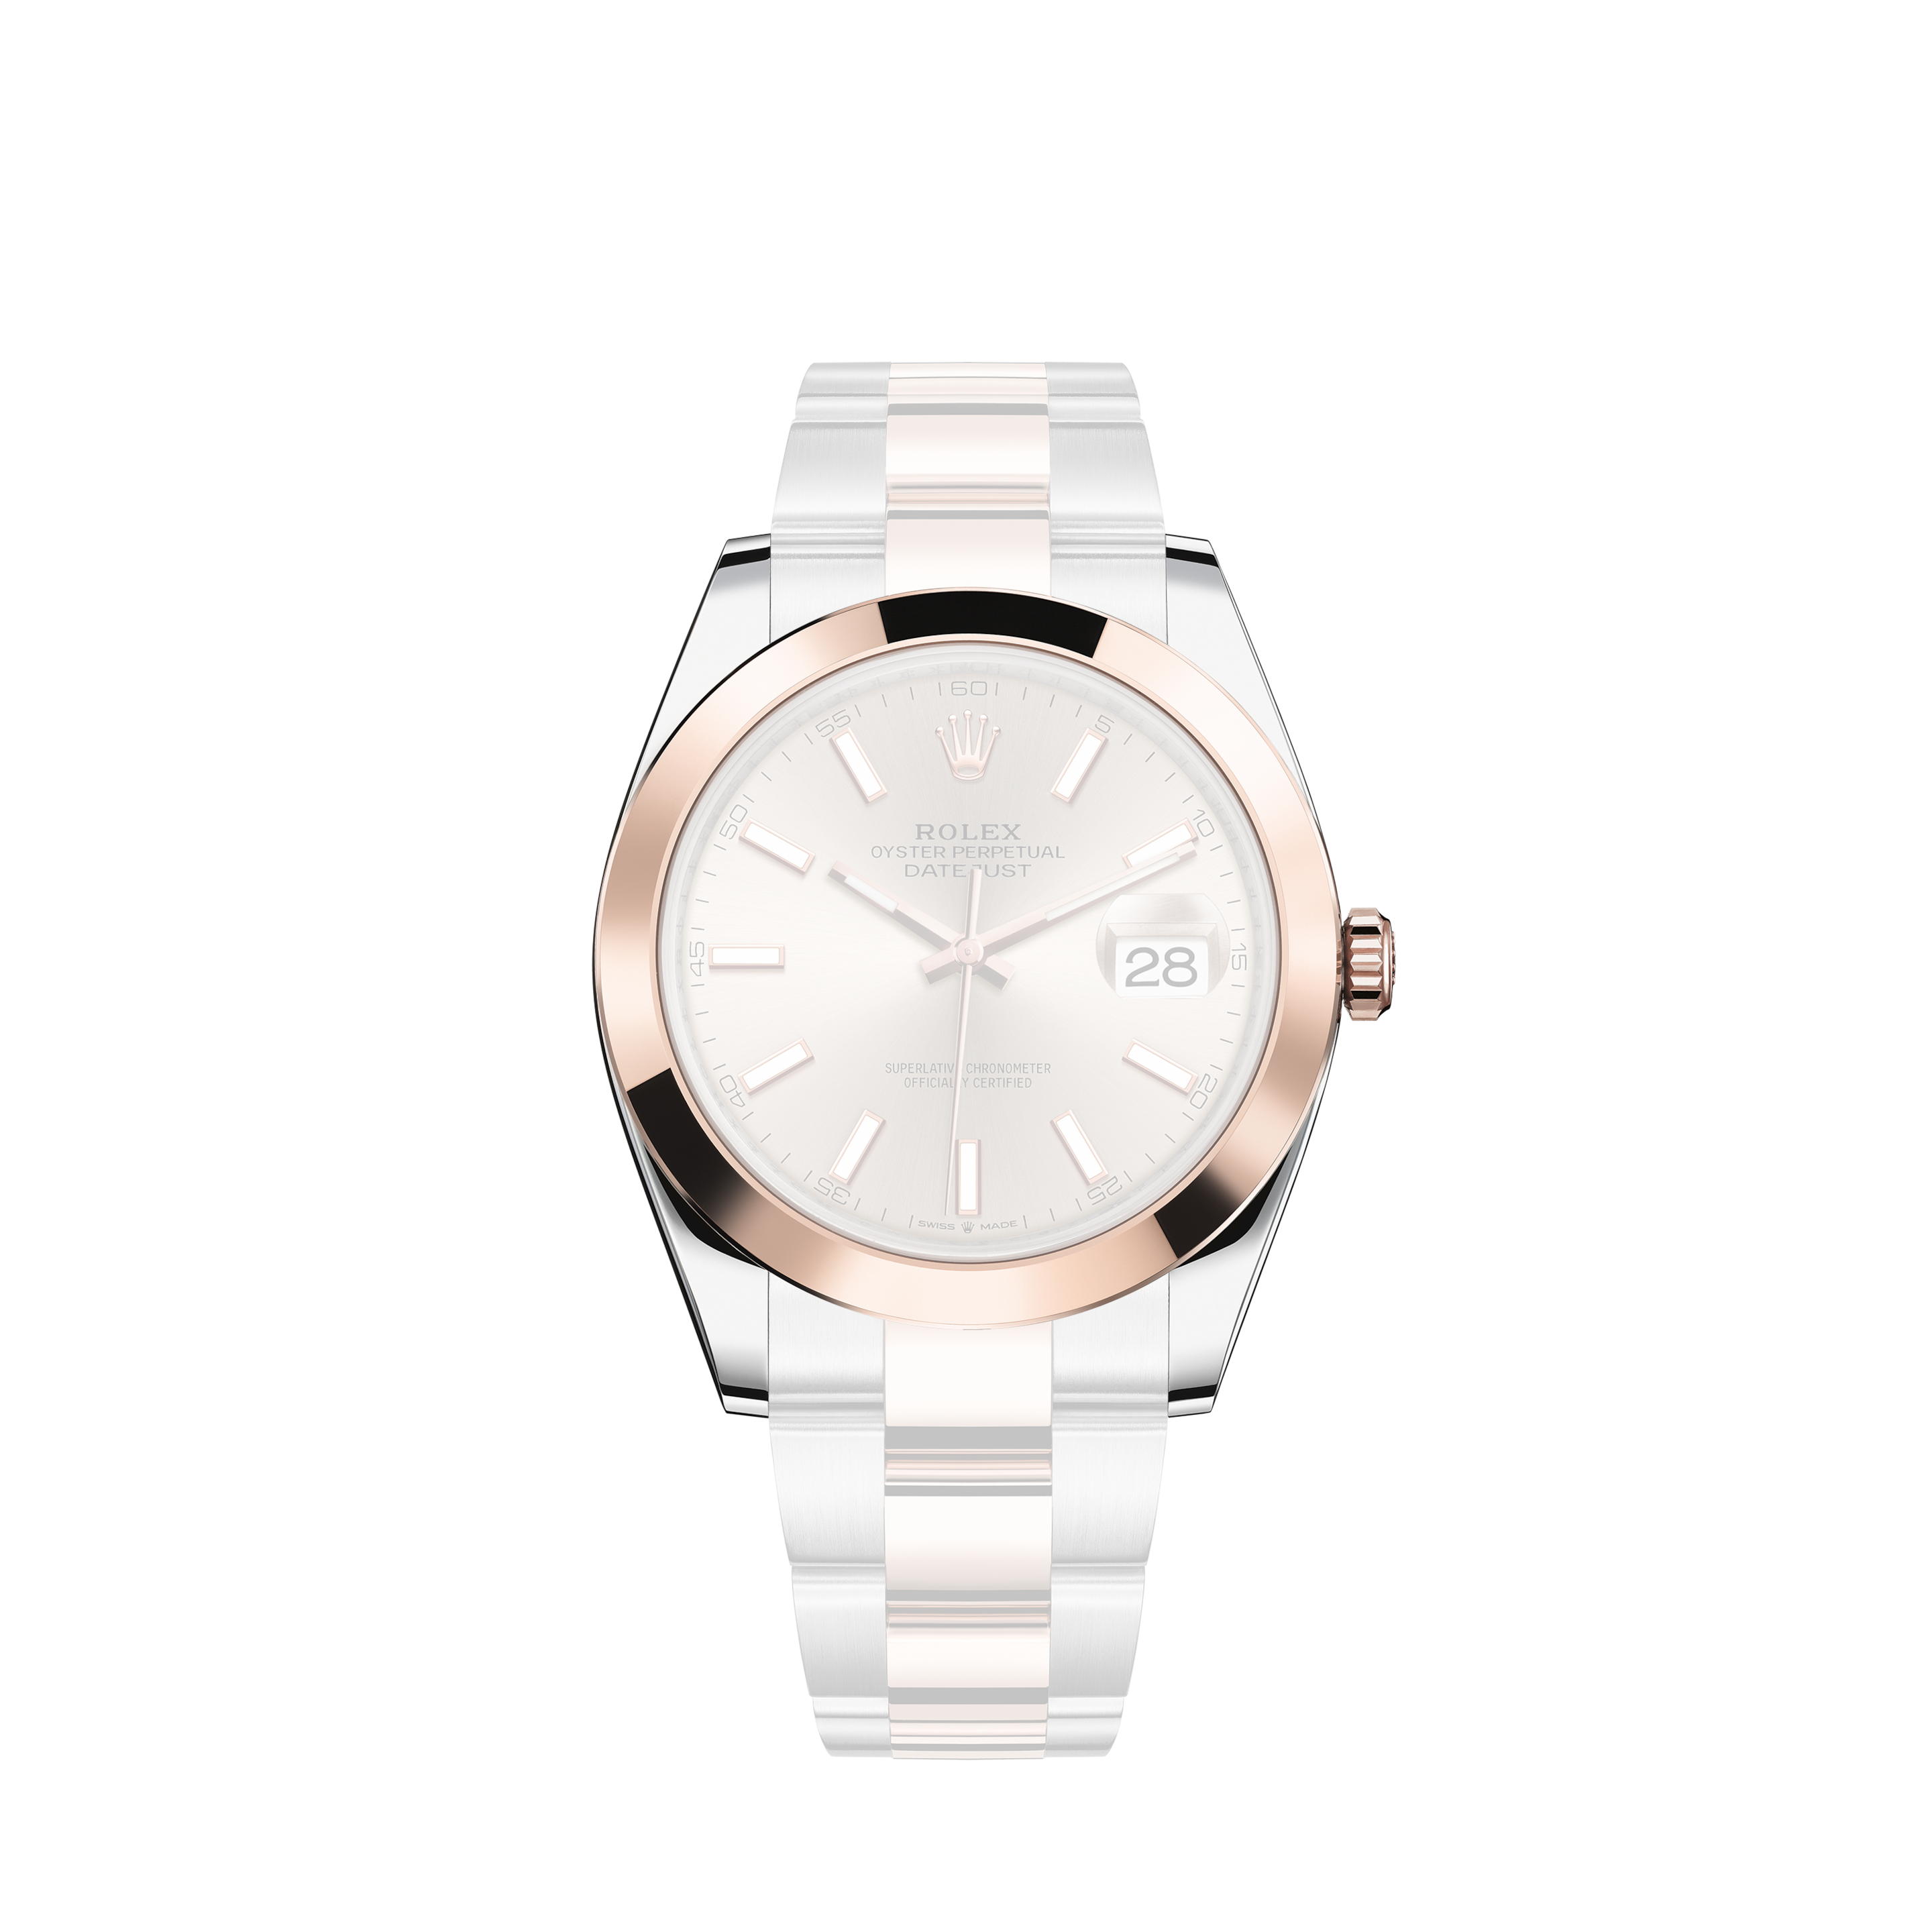 Rolex Datejust 41 Stainless Steel and Gold Silver Index Dial Watch 126333Rolex Datejust 41 Stainless Steel and Gold Wimbledon Roman Dial Watch 126303